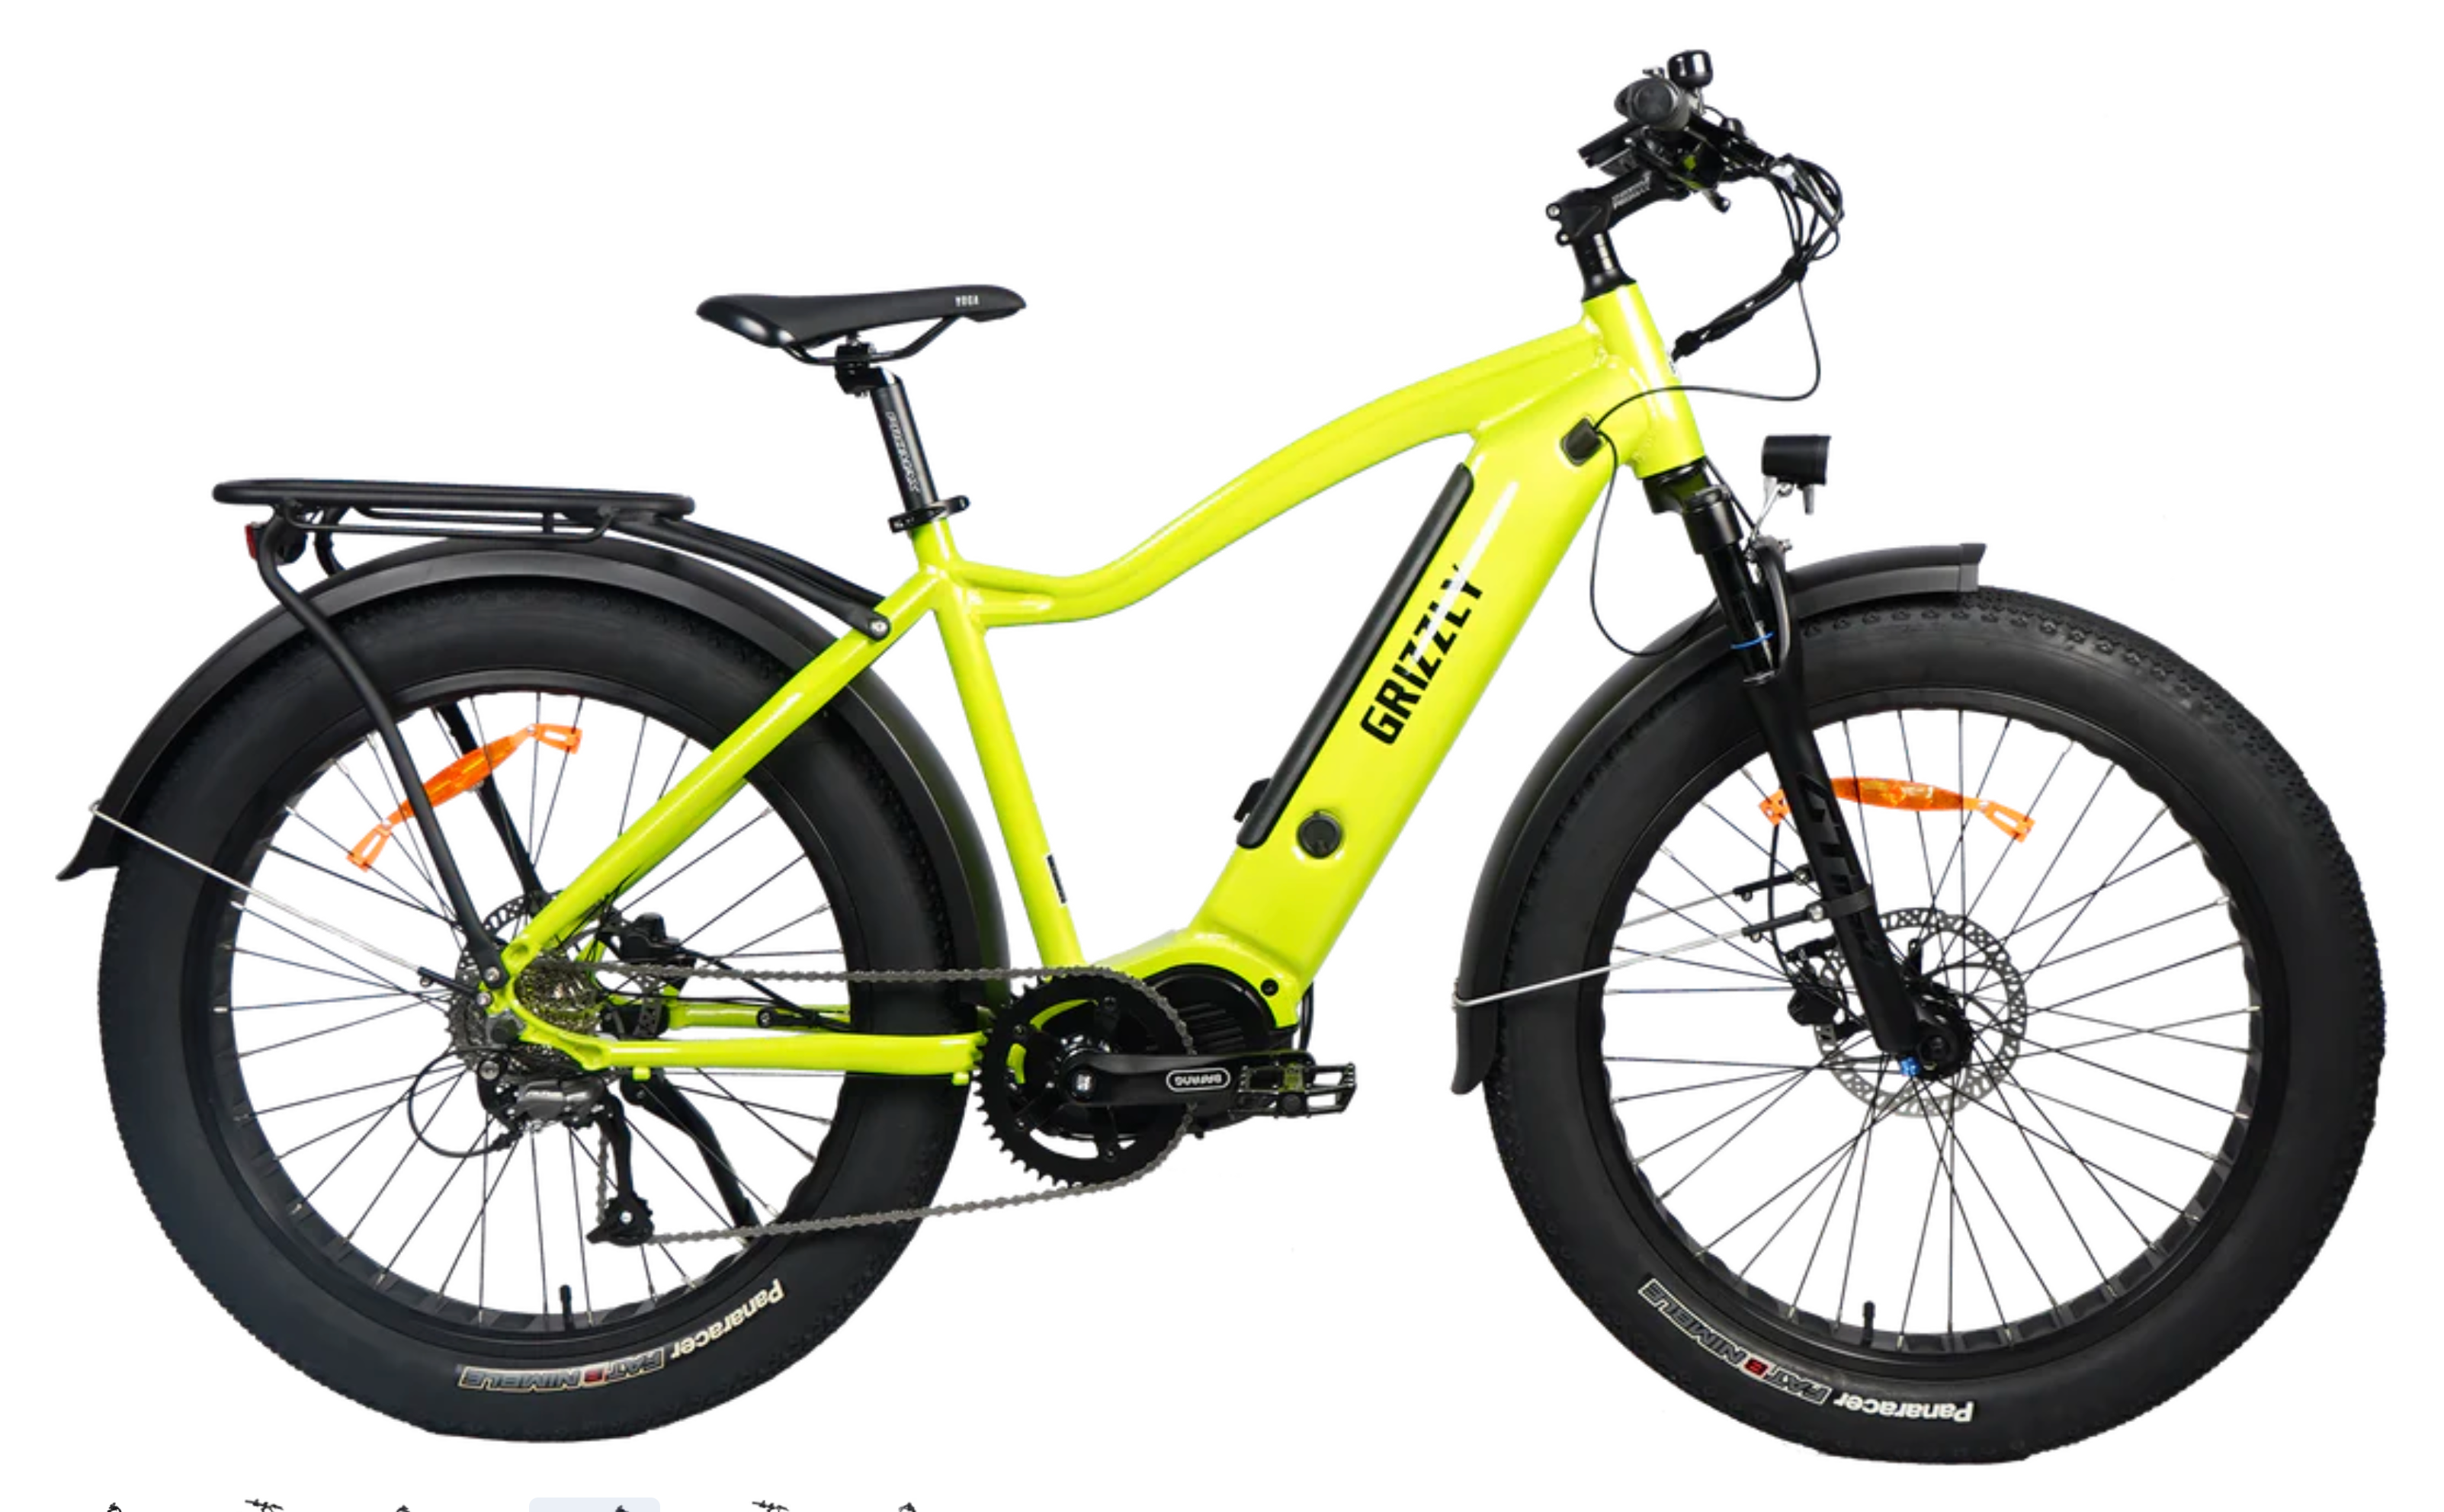 FunBike GRIZZLY Fat Tire Electric Bike